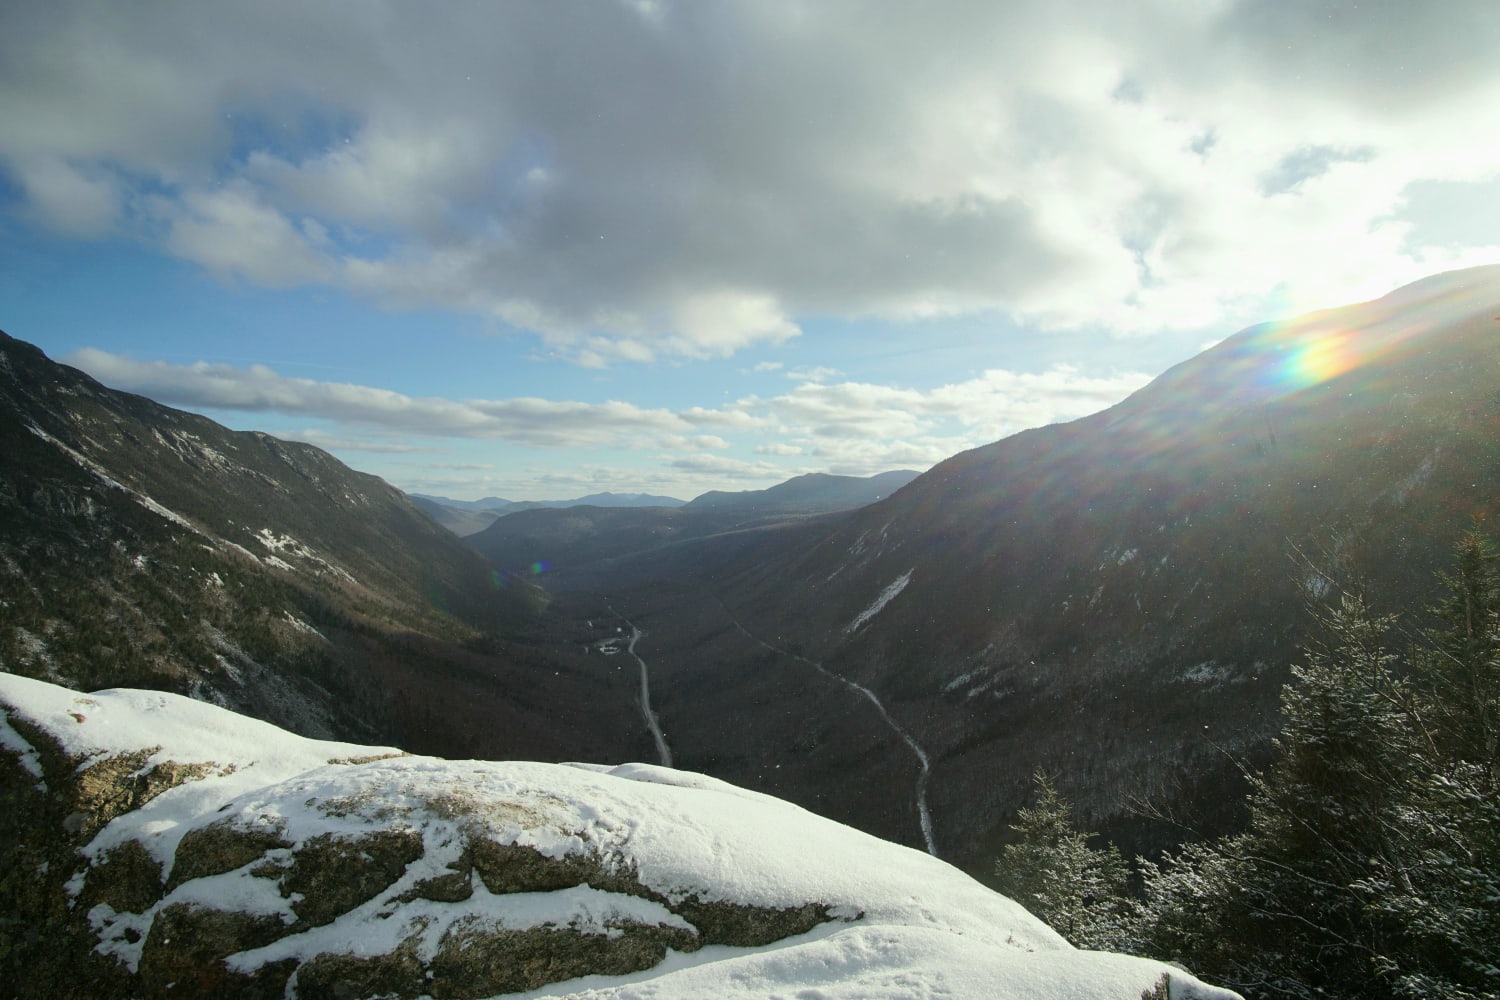 My first winter hike - Mount Willard, White Mountain National Forest, New Hampshire, USA